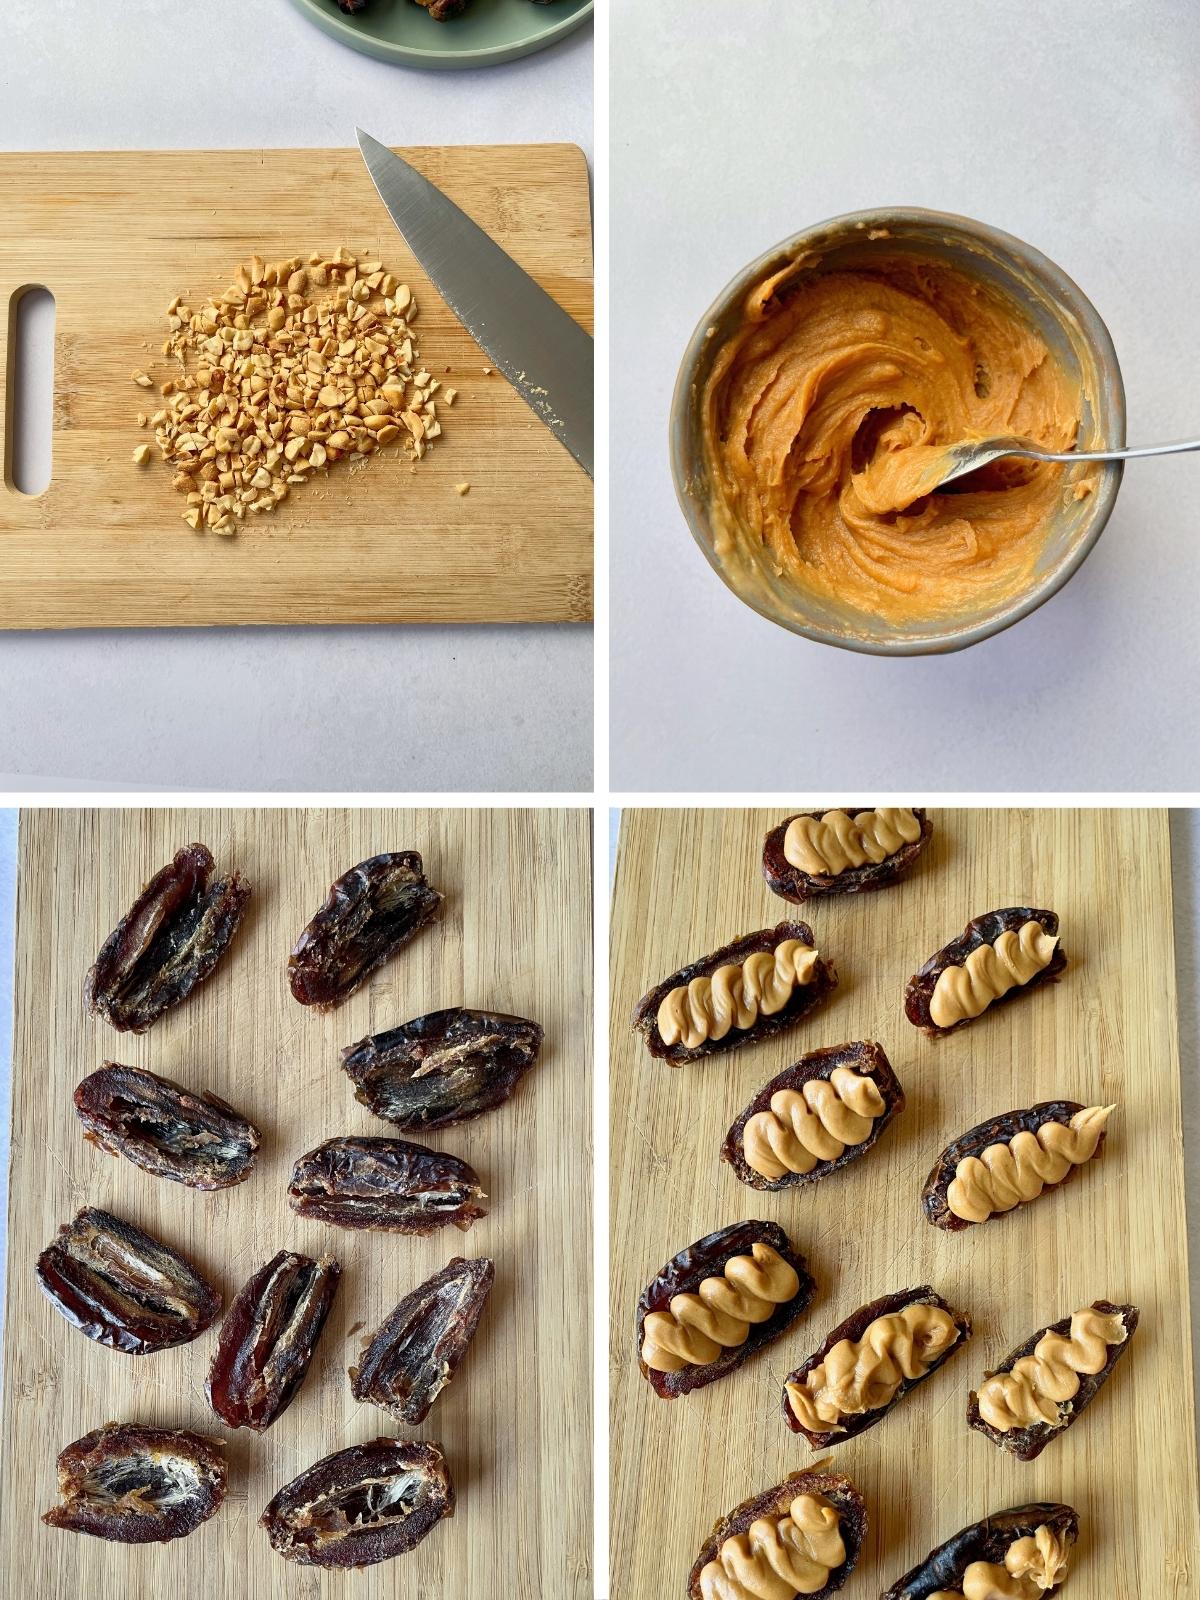 Preparation steps for chocolate dates.